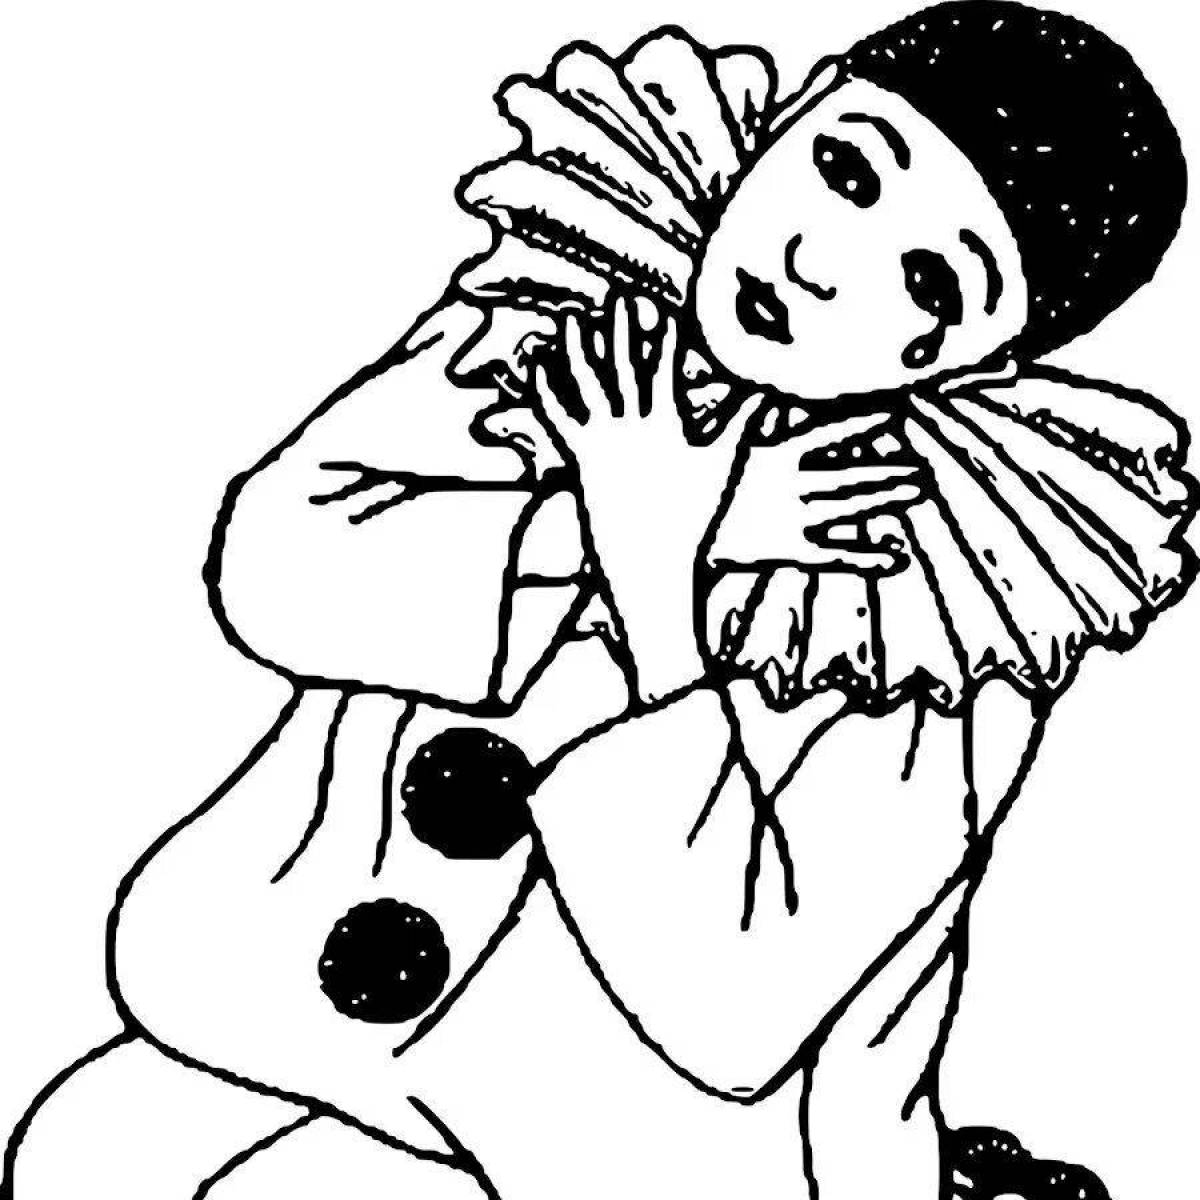 Jolly pierrot from Pinocchio